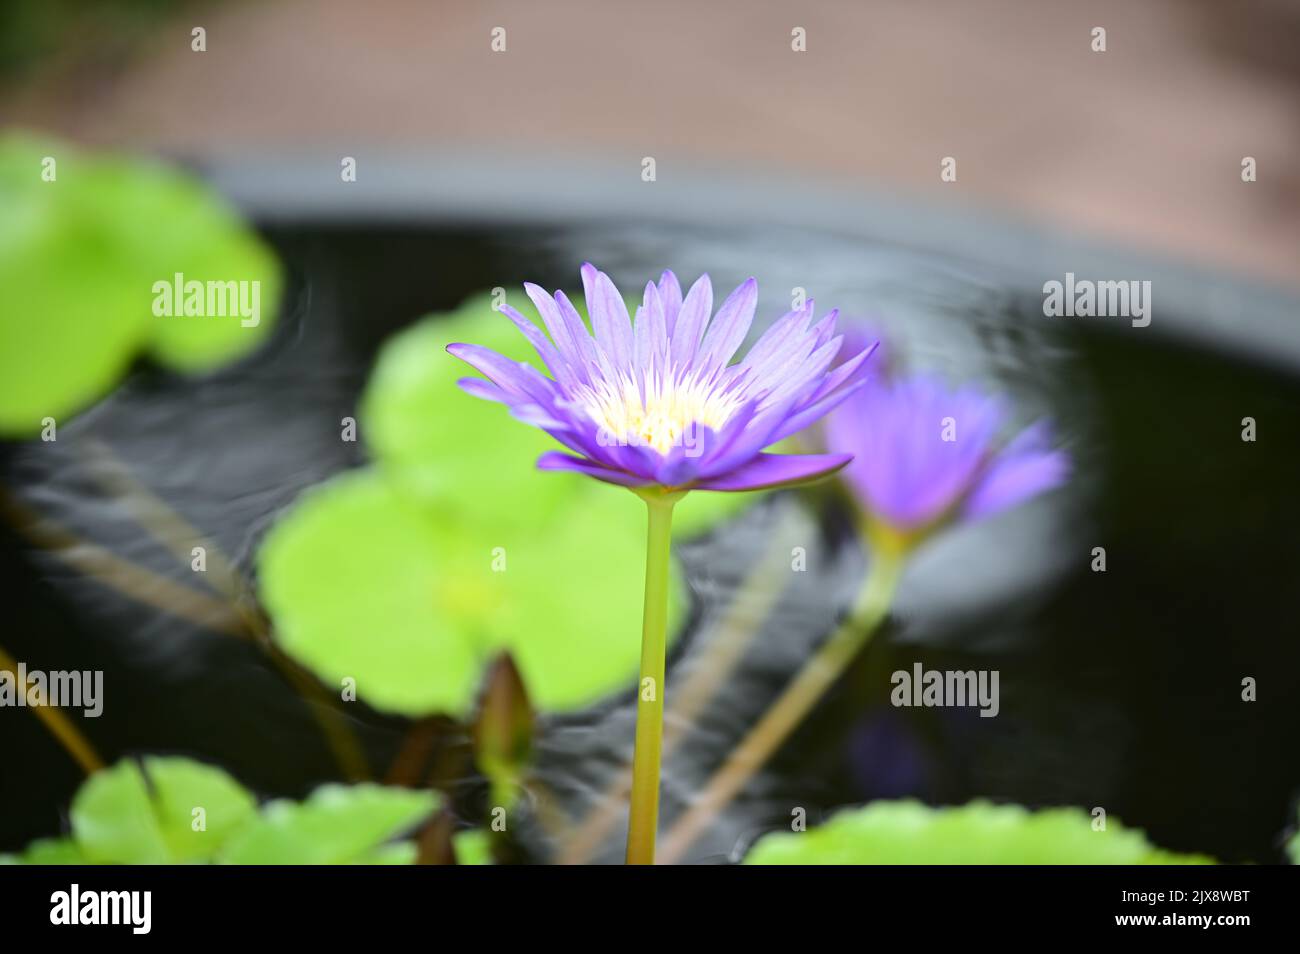 Purple water lilies bloom beautifully in the pond Stock Photo